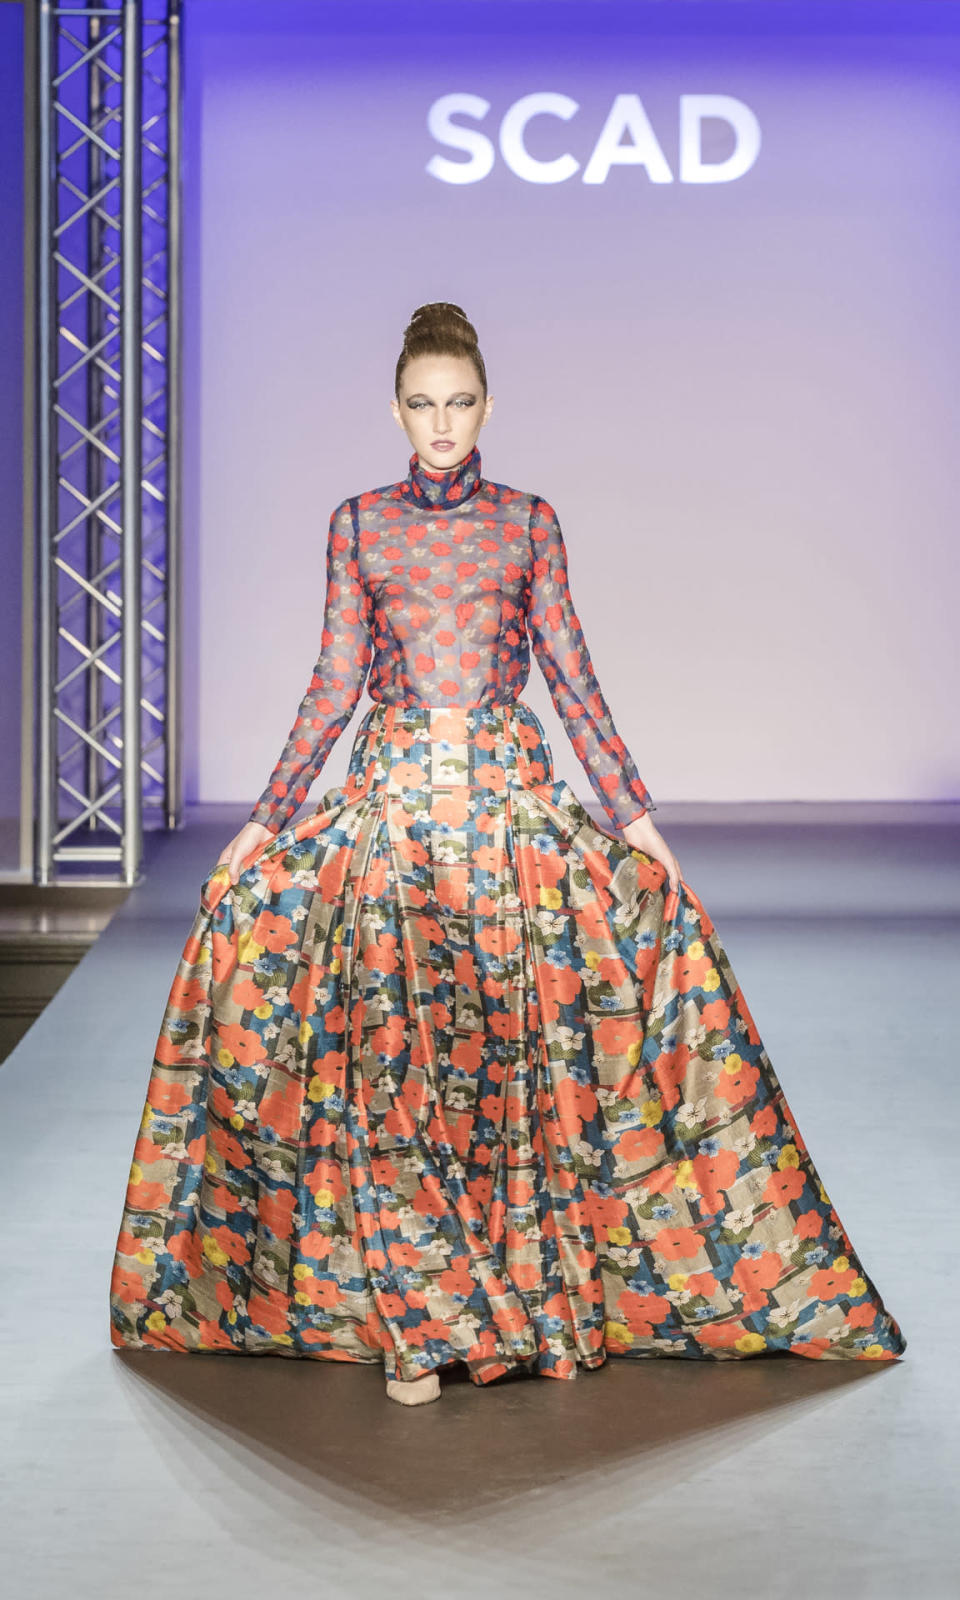 SCAD Graduate Jeffrey Taylor’s unapologetically romantic designs were an audience favorite. “He could get a job at Oscar [de la Renta] tomorrow,” one well-known fashion editor exclaimed as this dress swanned down the runway.